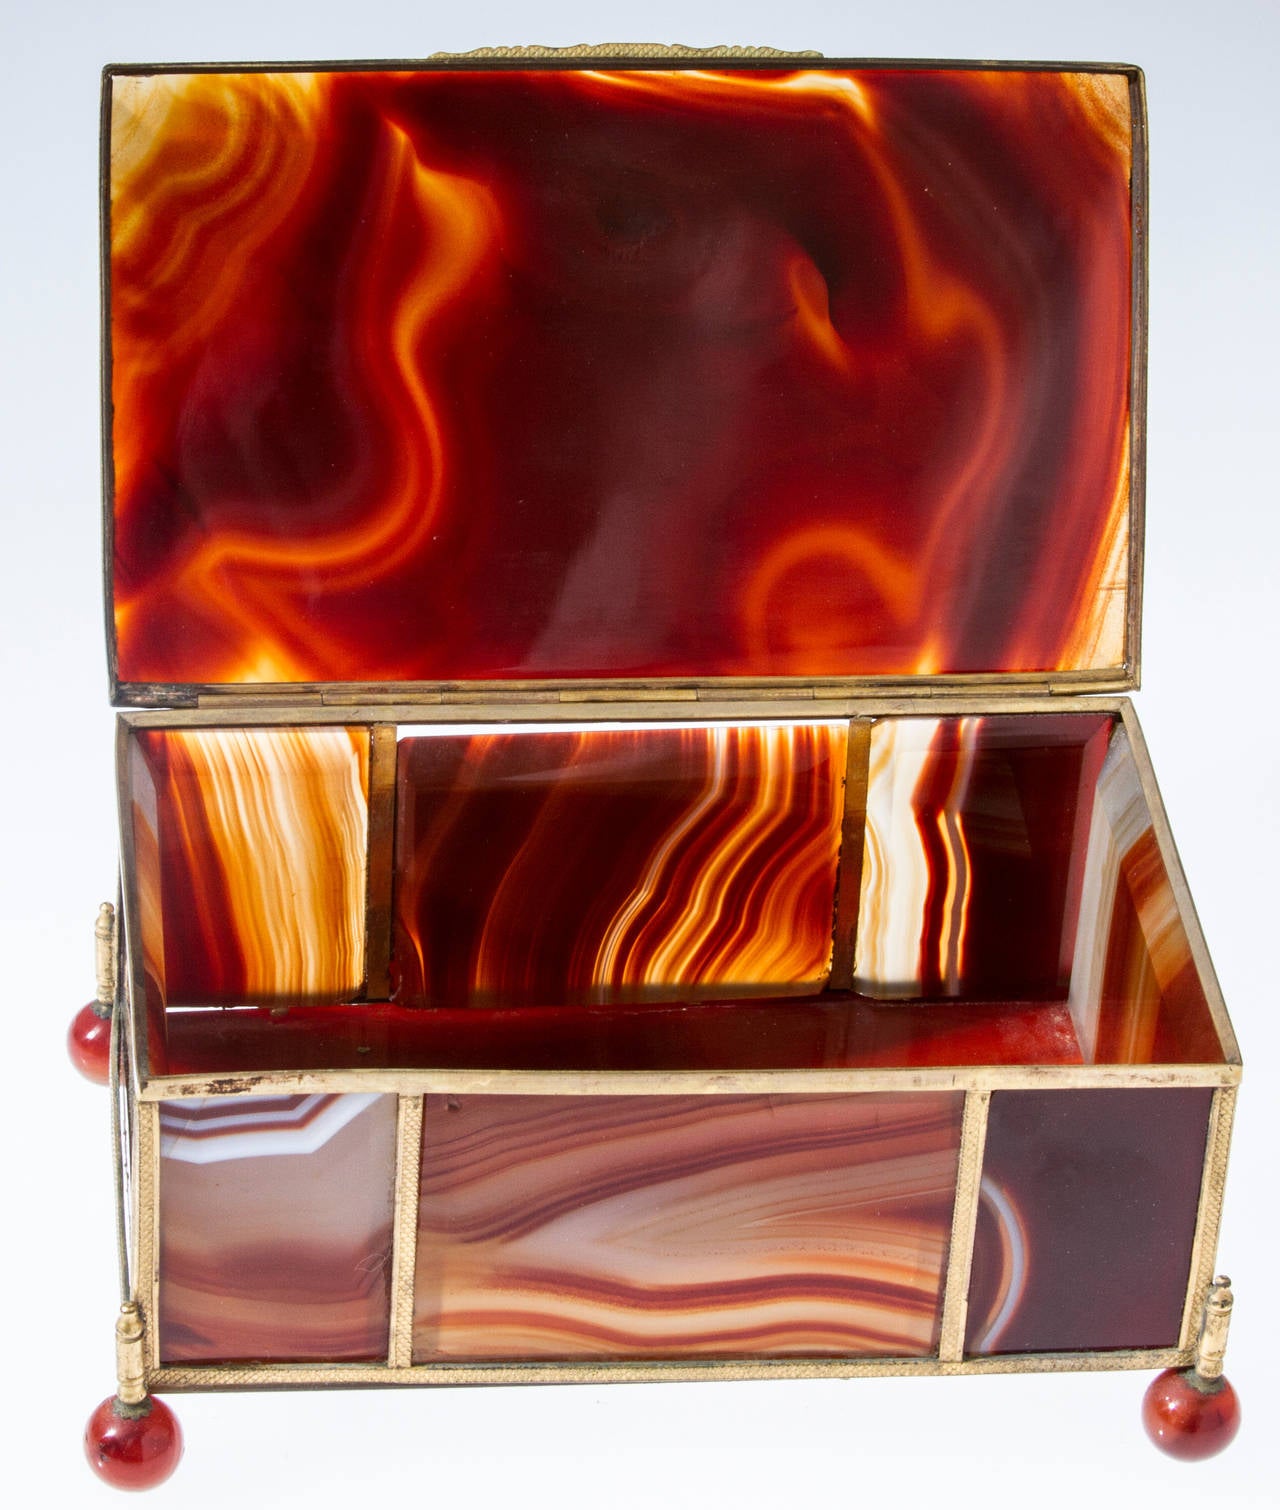 19th Century Large Agate Box with Bronze Dore Fittings